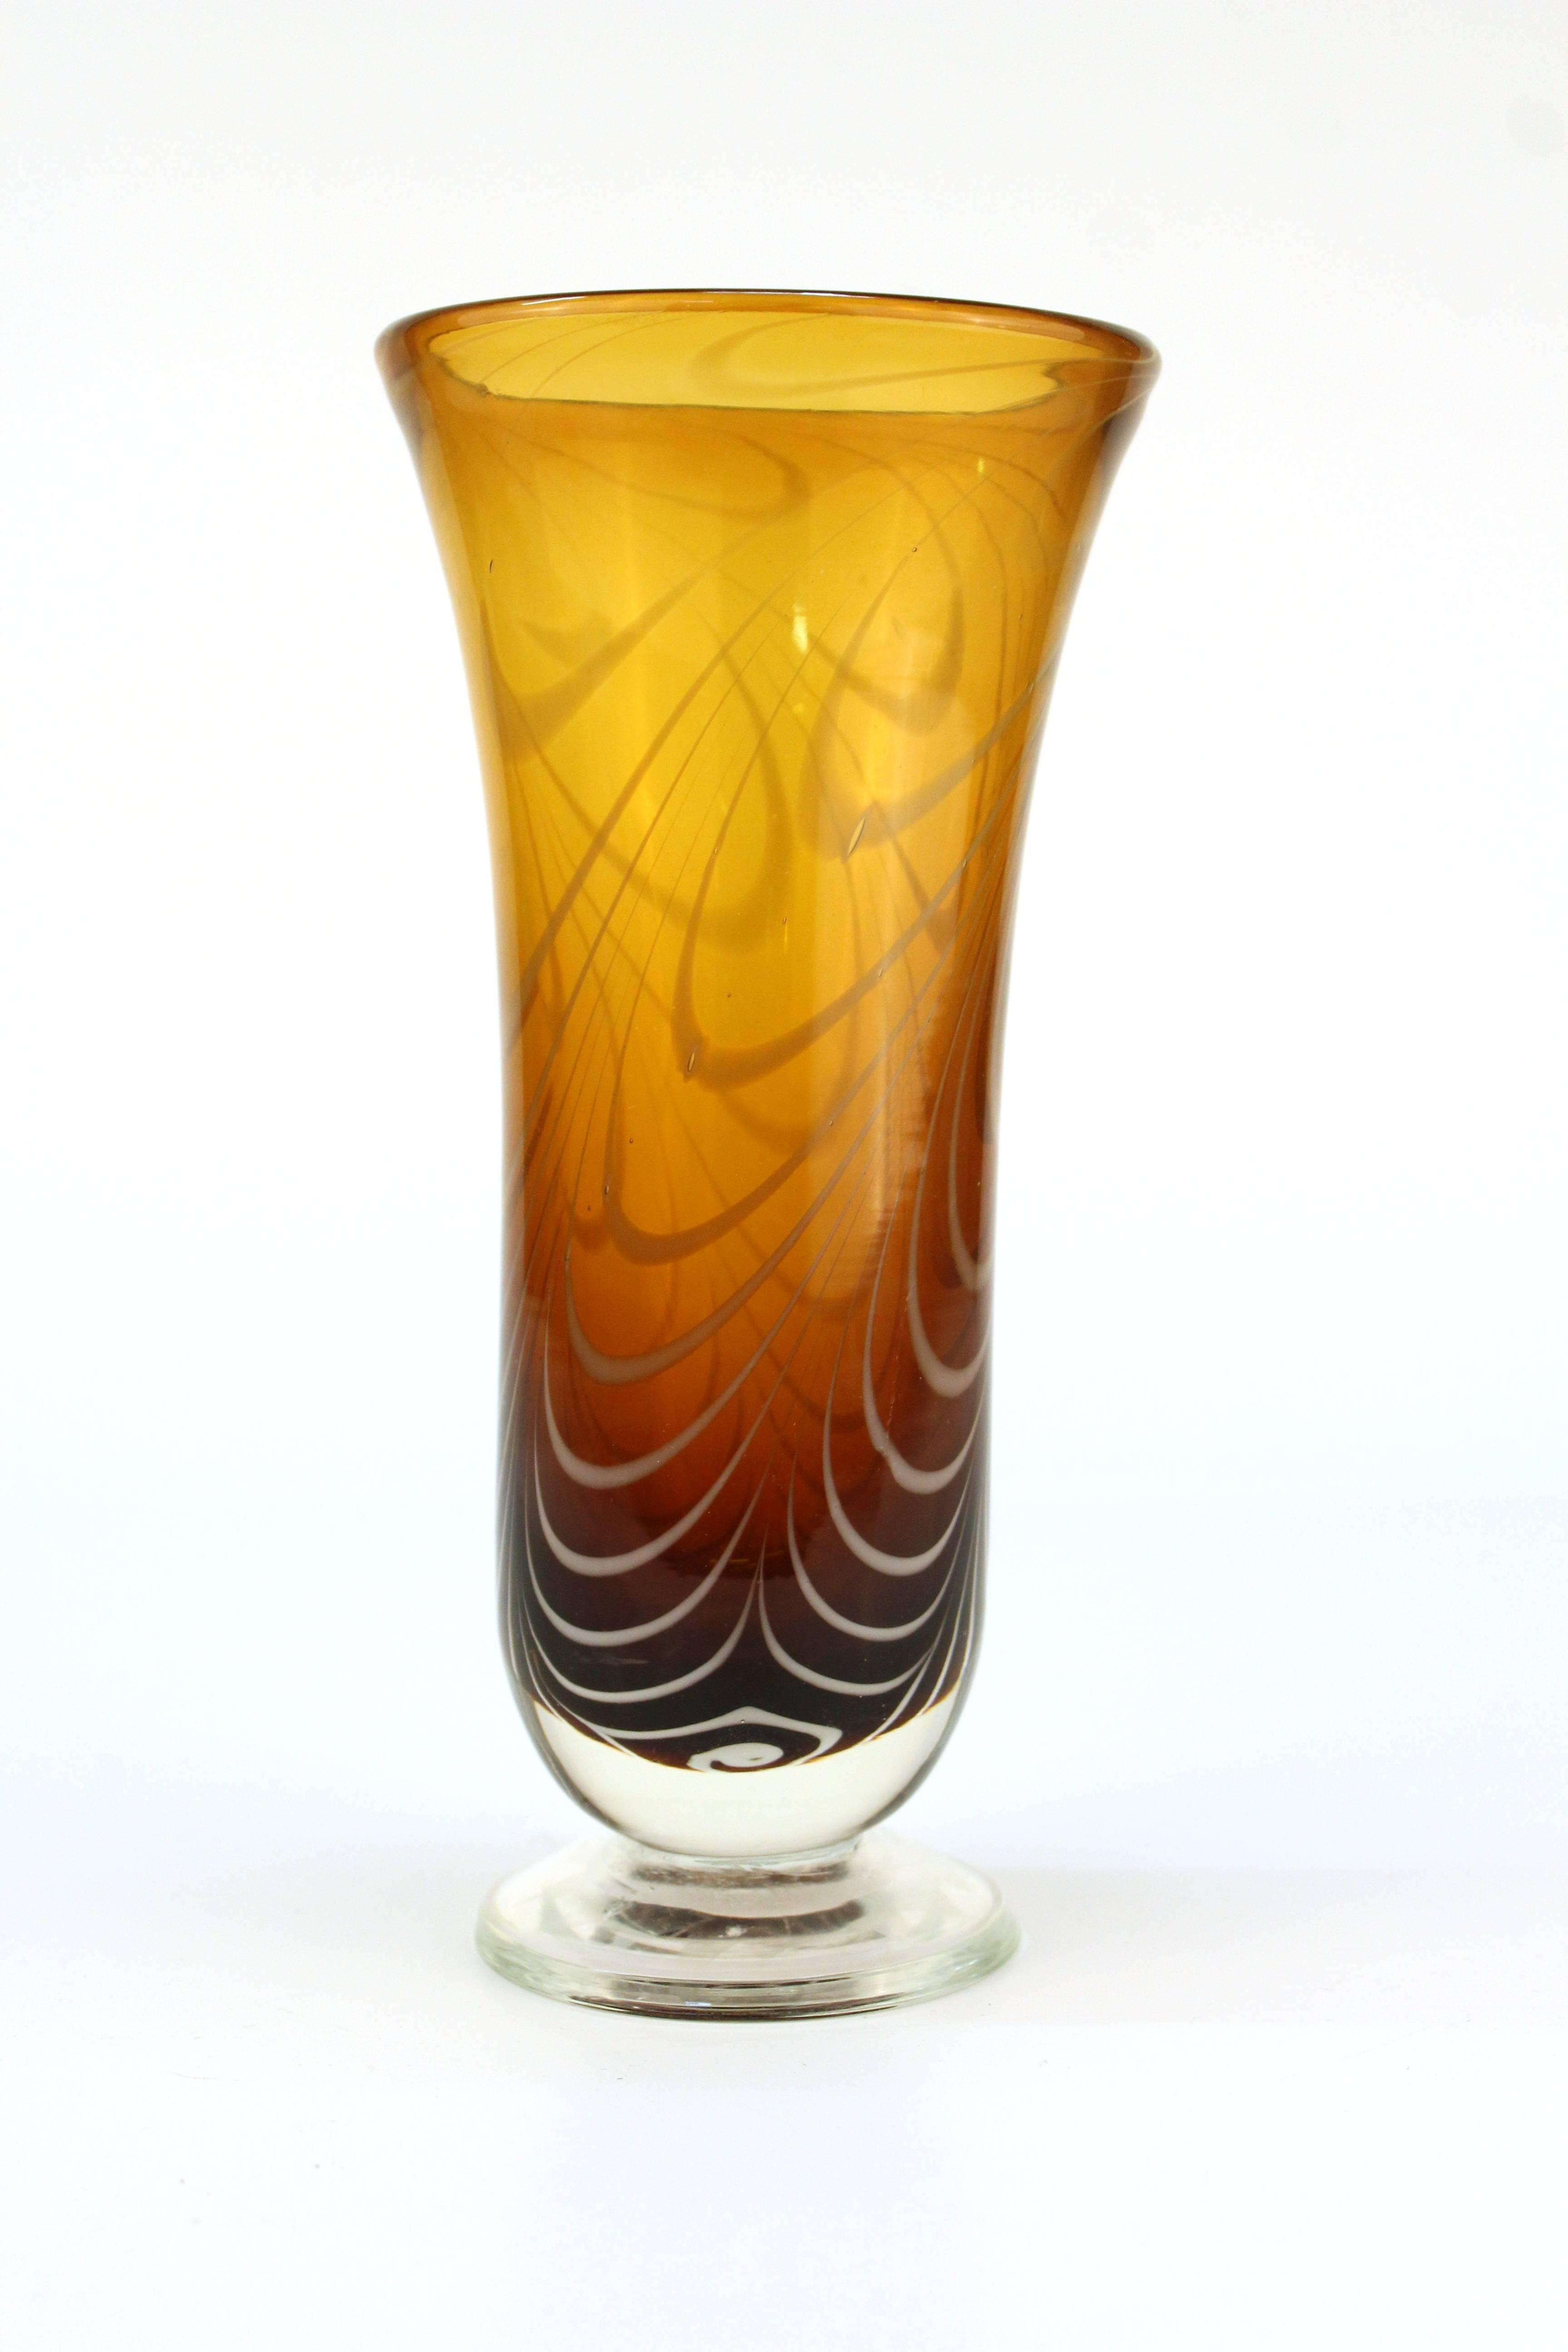 A vintage glass vase in amber art glass, artfully adorned with white swirls. 

110611

 